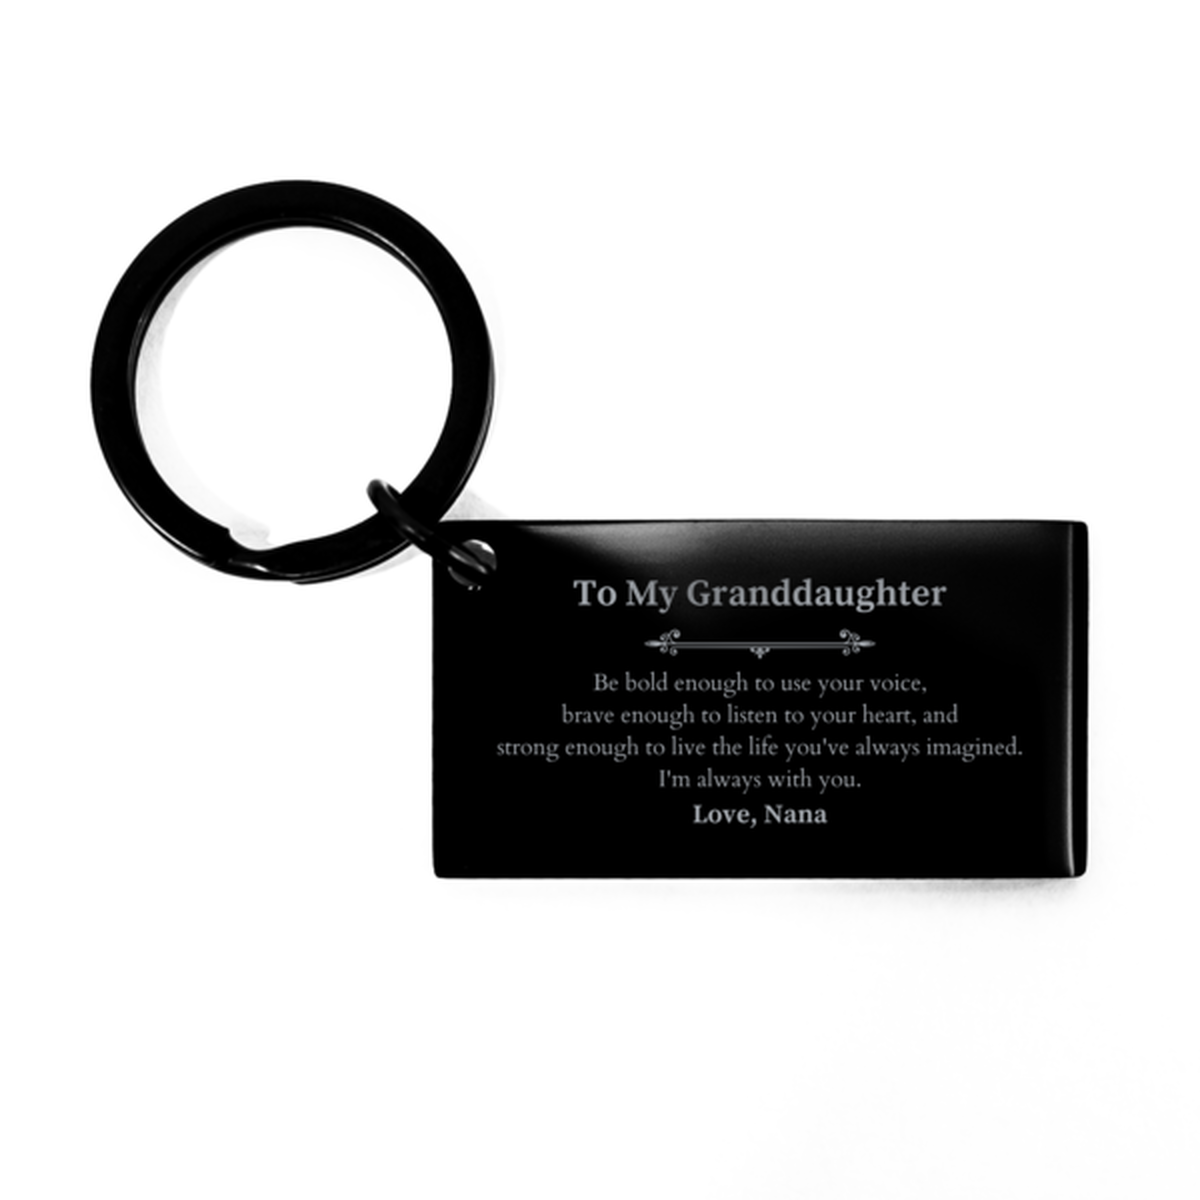 Keepsake Granddaughter Keychain Gift Idea Graduation Christmas Birthday Granddaughter from Nana, Granddaughter Be bold enough to use your voice, brave enough to listen to your heart. Love, Nana